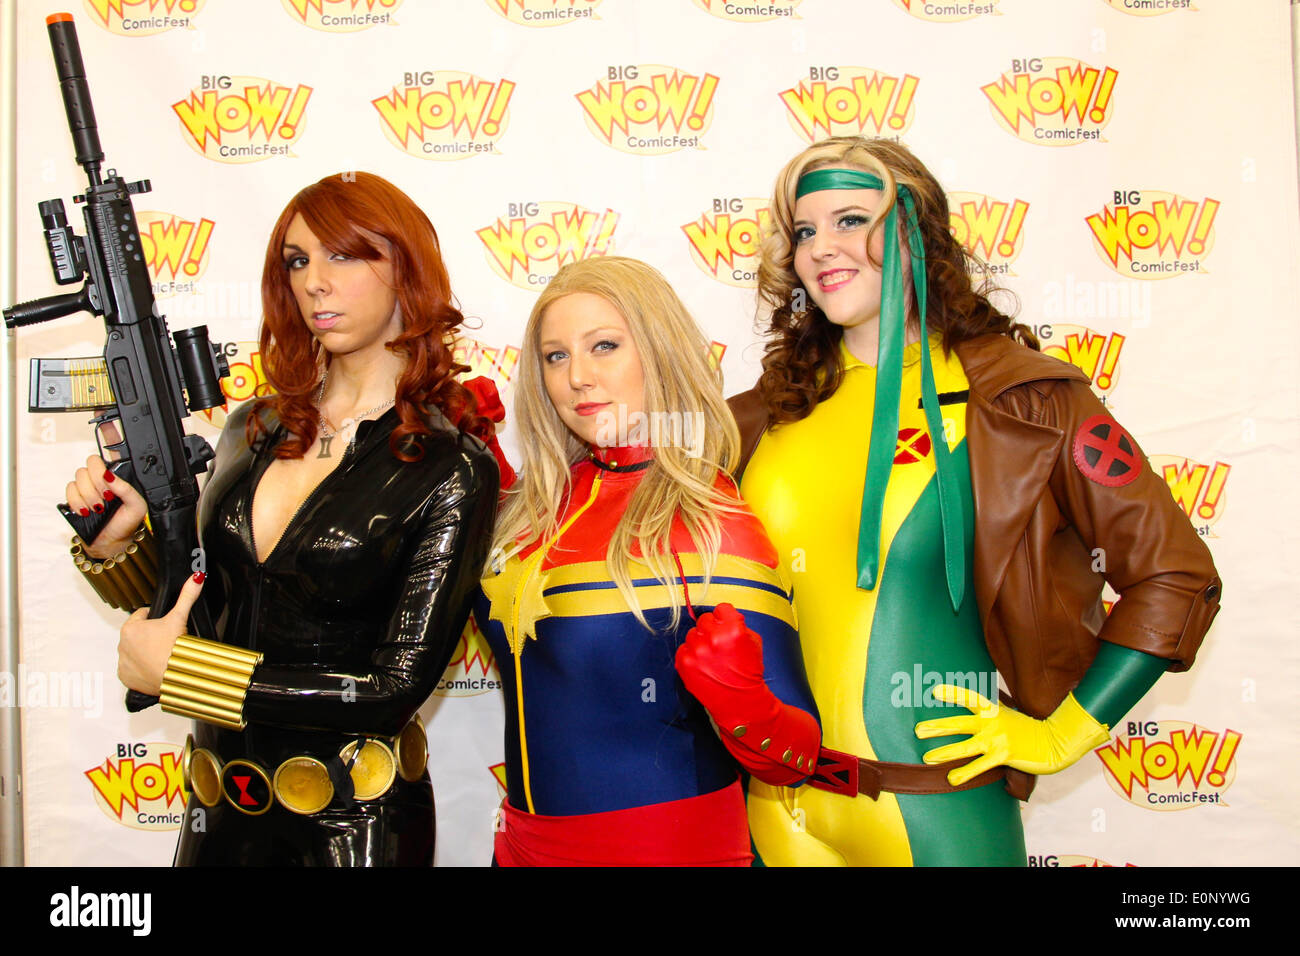 San Jose, California USA -17 May, 2014 The Big Wow ComicFest at the San Jose Convention Center. [L to R] Jerica Truax as Black Widow, Kristen Jensen as Captain Marvel, and Abi Selvidge as Rogue drove from Seattle to attend the comic book convention. They started a non-profit and visit Pediatric wards in costumes to cheer up sick children. (Comic Book Characters For Causes at cbc4c.org) Stock Photo